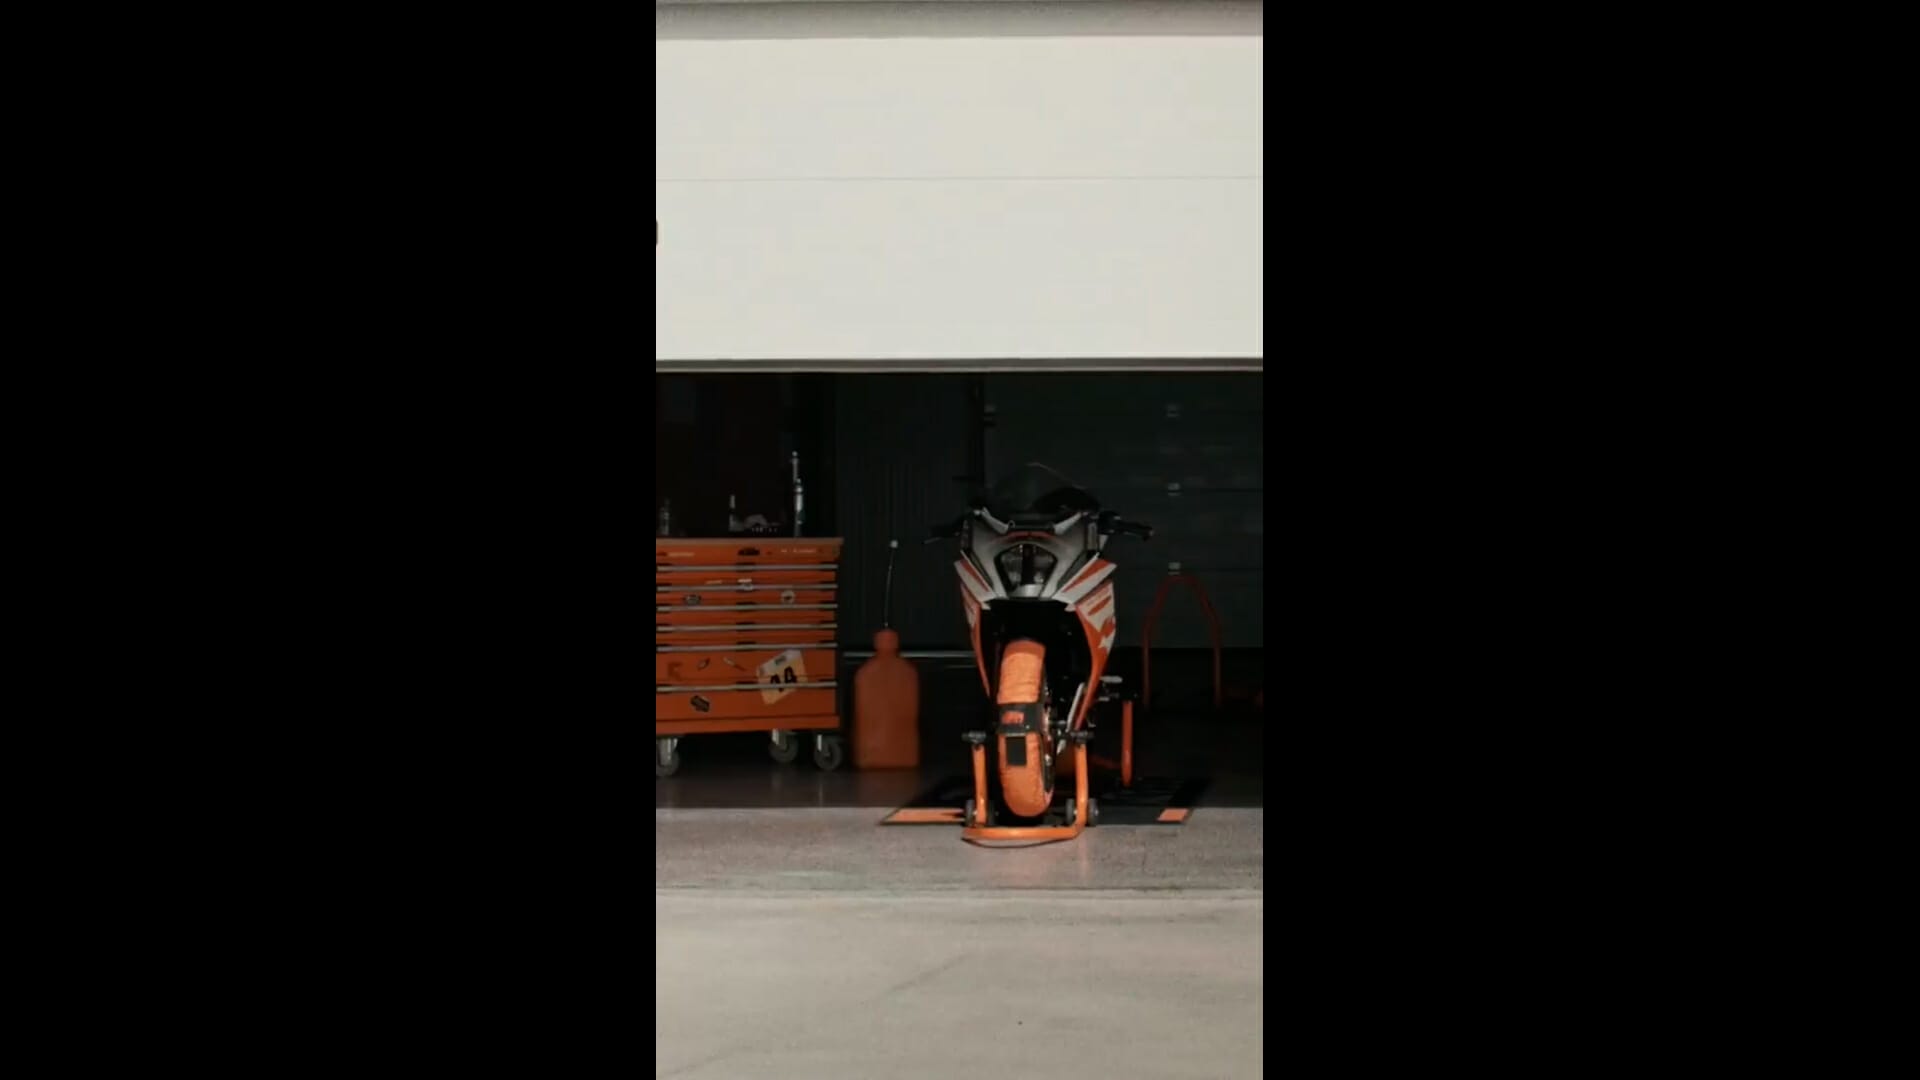 KTM teases RC 390
- also in the MOTORCYCLES.NEWS APP